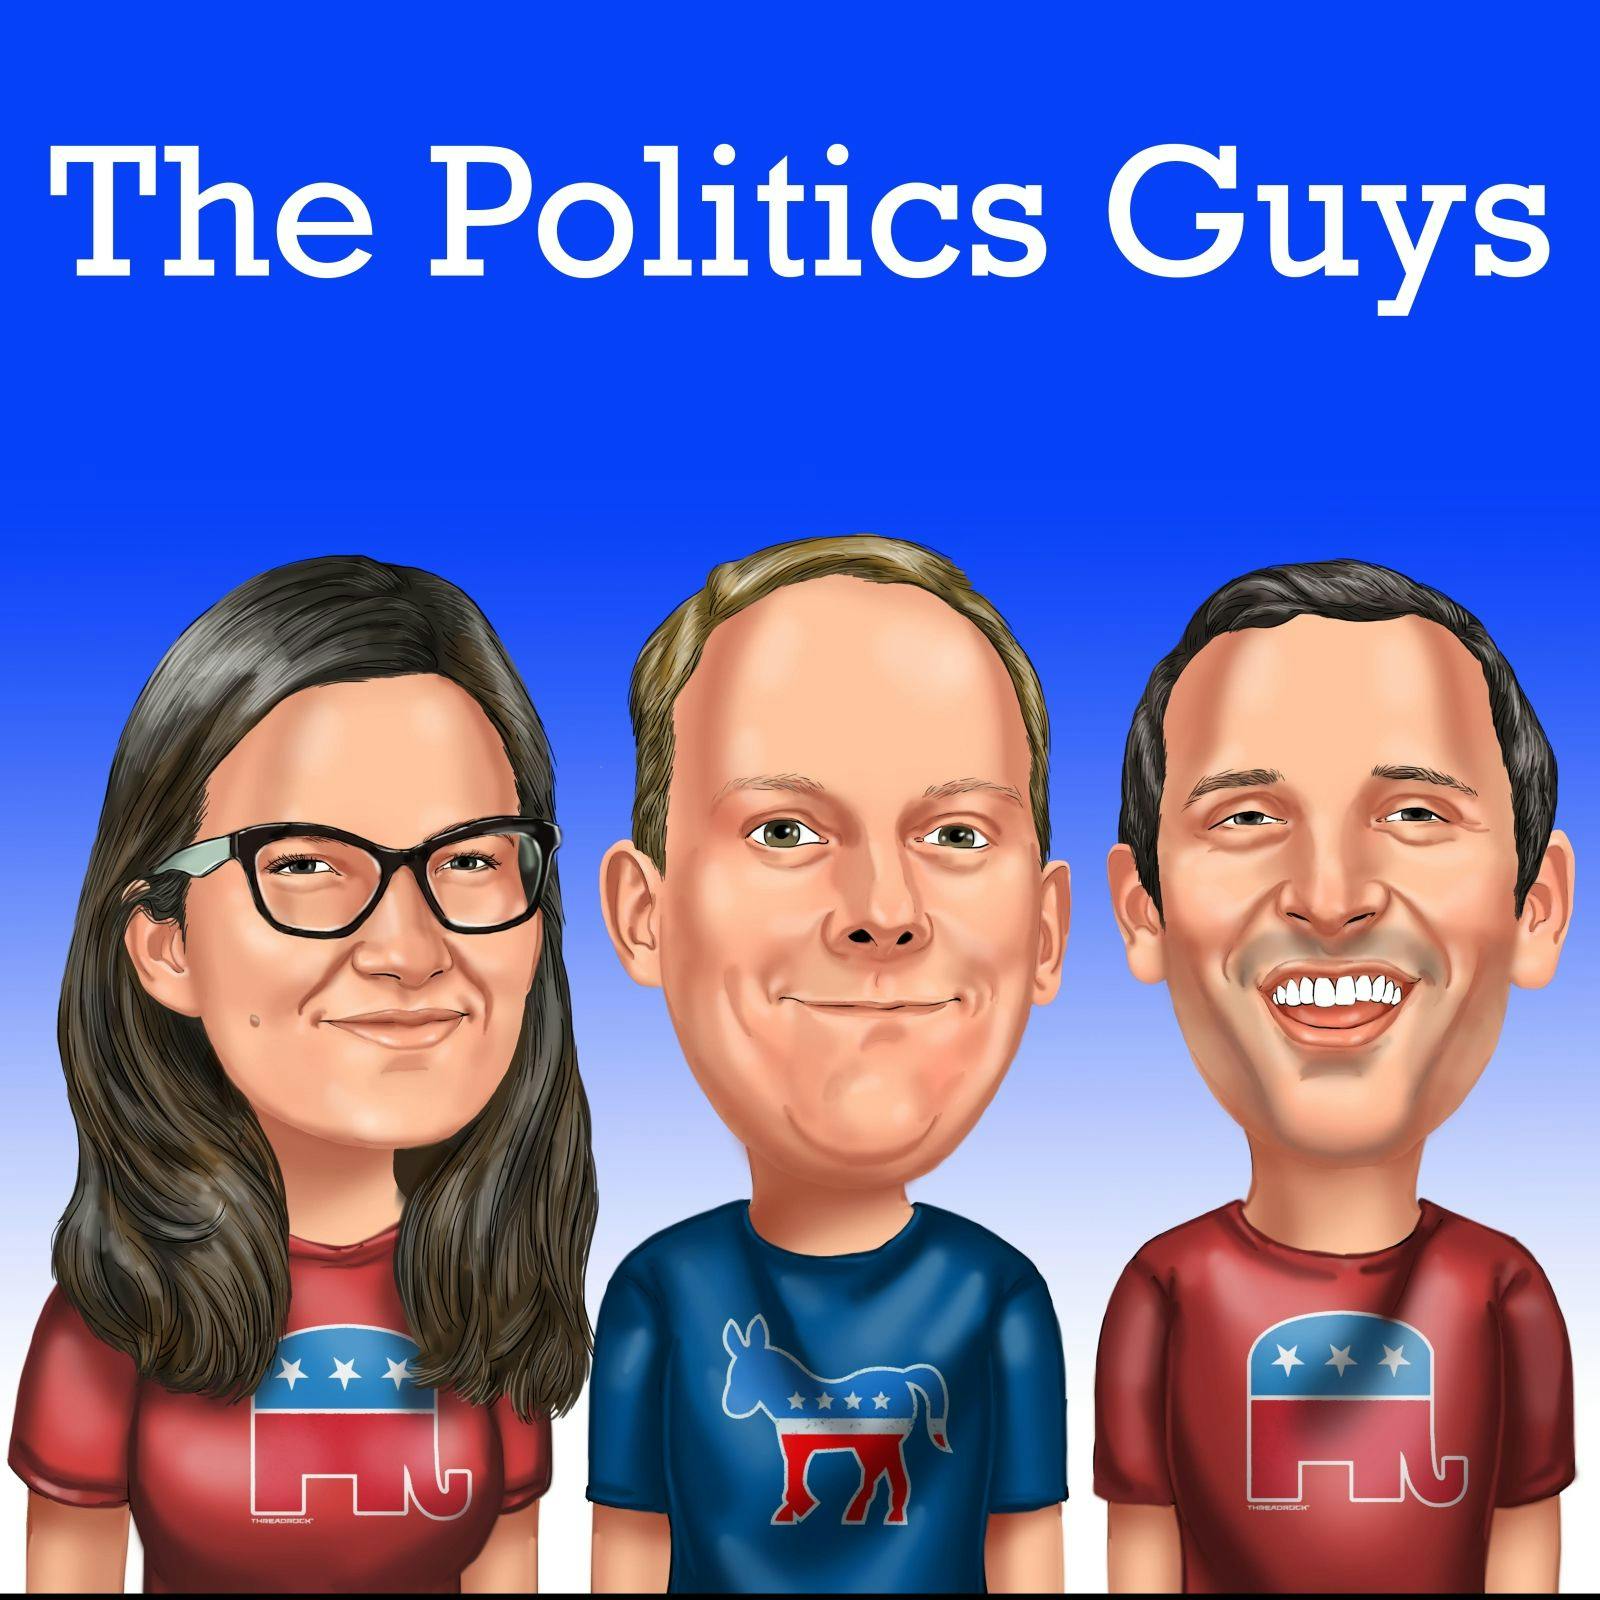 Superdelegates, Democratic Strategy, Biden’s Troubled Past, Out of Touch Politics Guys, and Media Bias